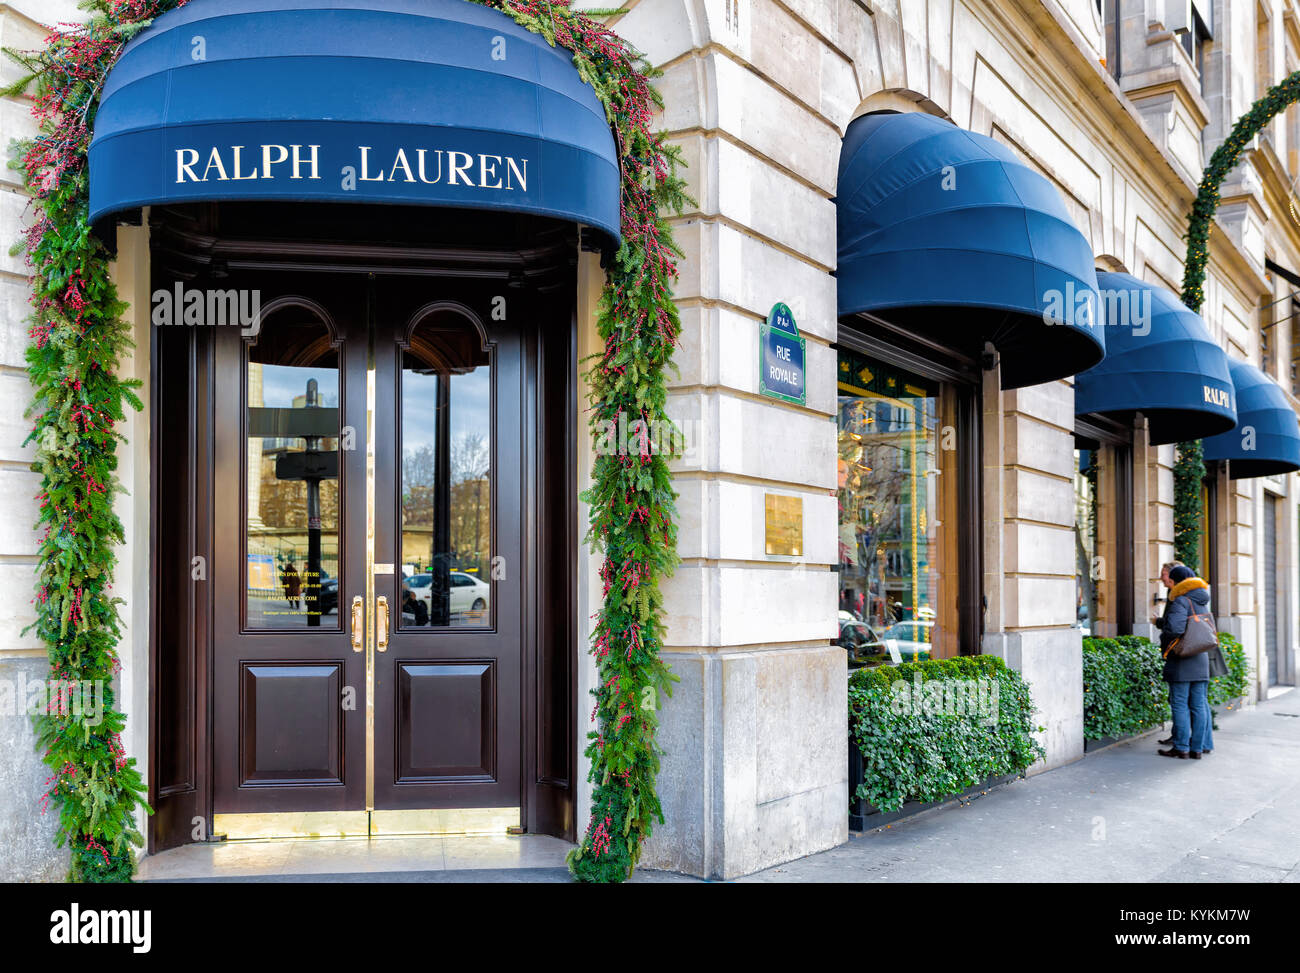 Ralph Lauren High Resolution Stock Photography and Images - Alamy